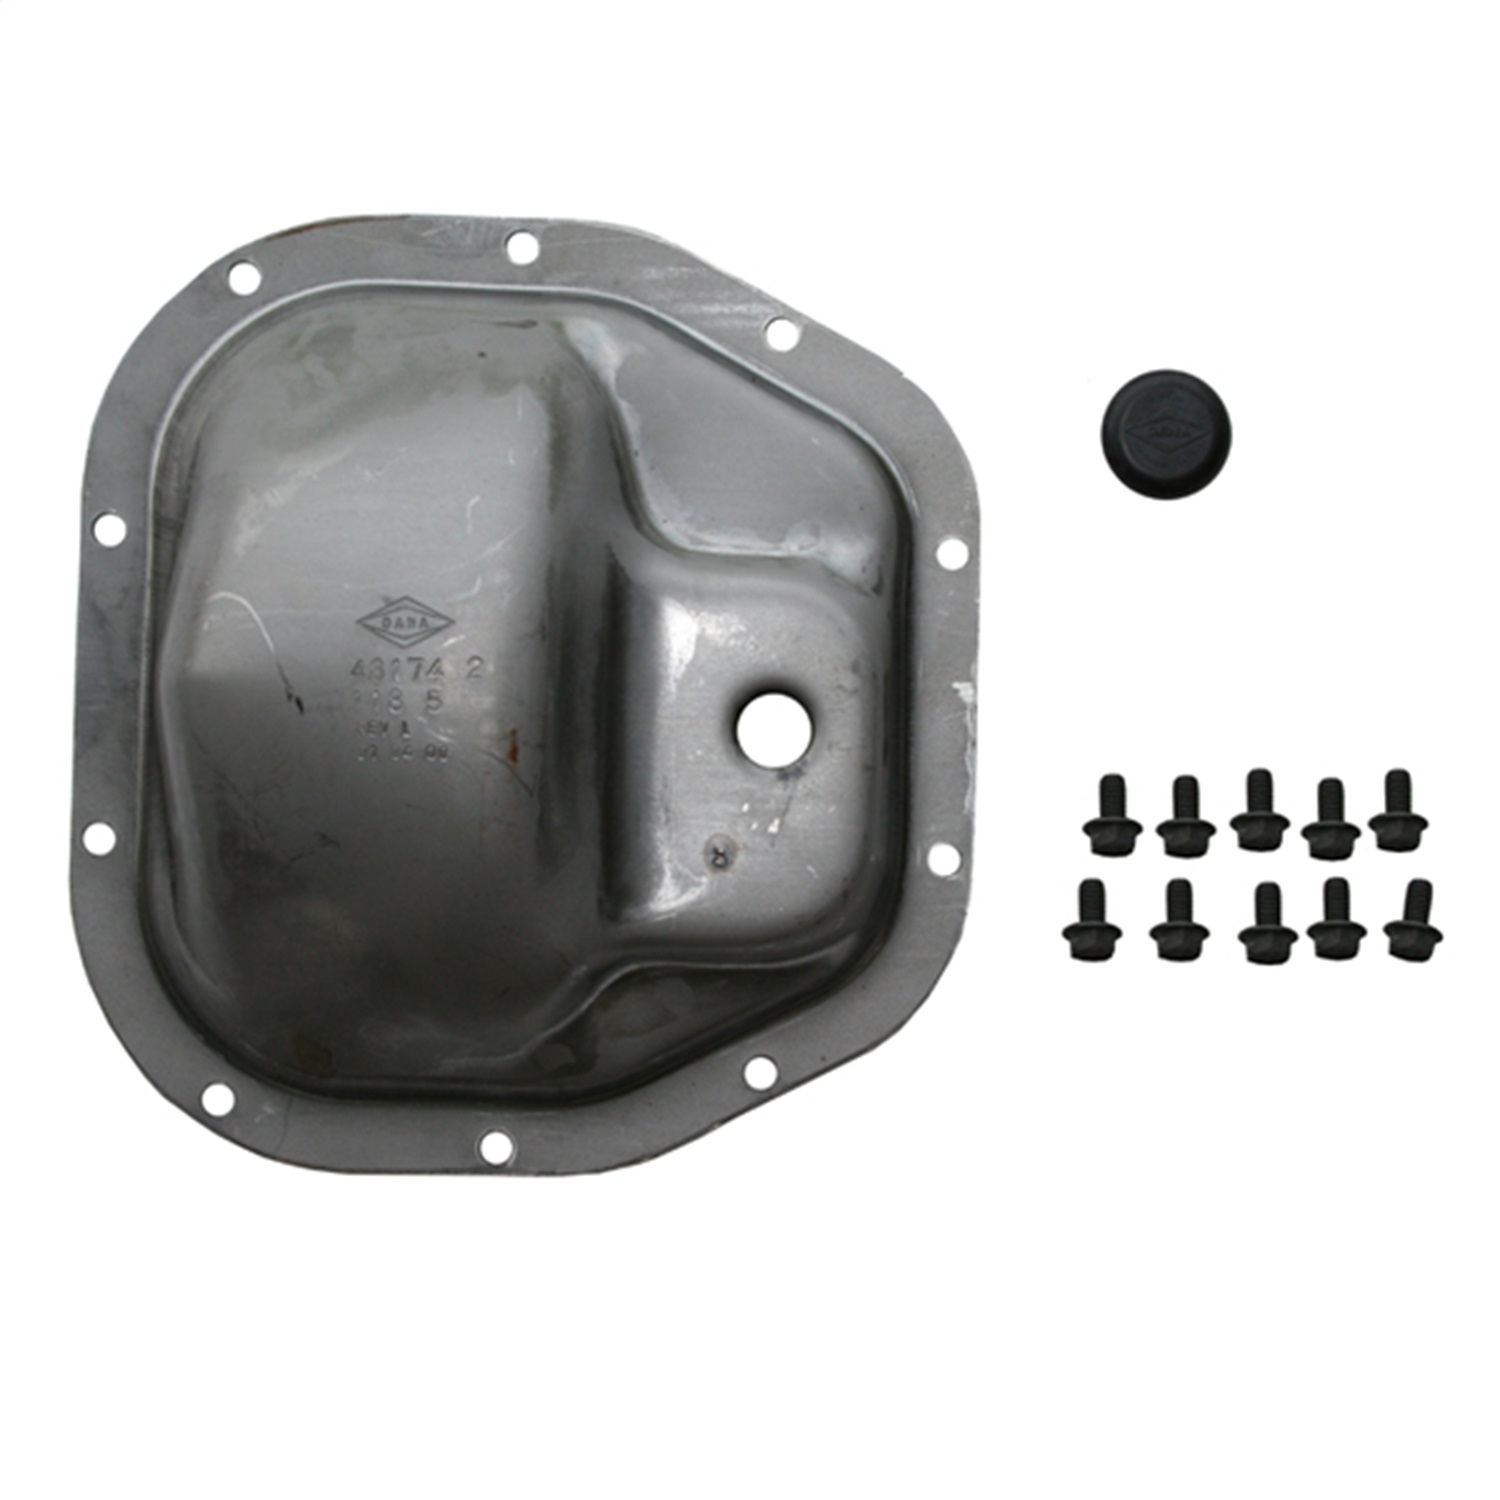 Omix Differential Cover, Rear; 99-04 Jeep Grand Cherokee Wj, For Dana 44, BKGF-16595.84